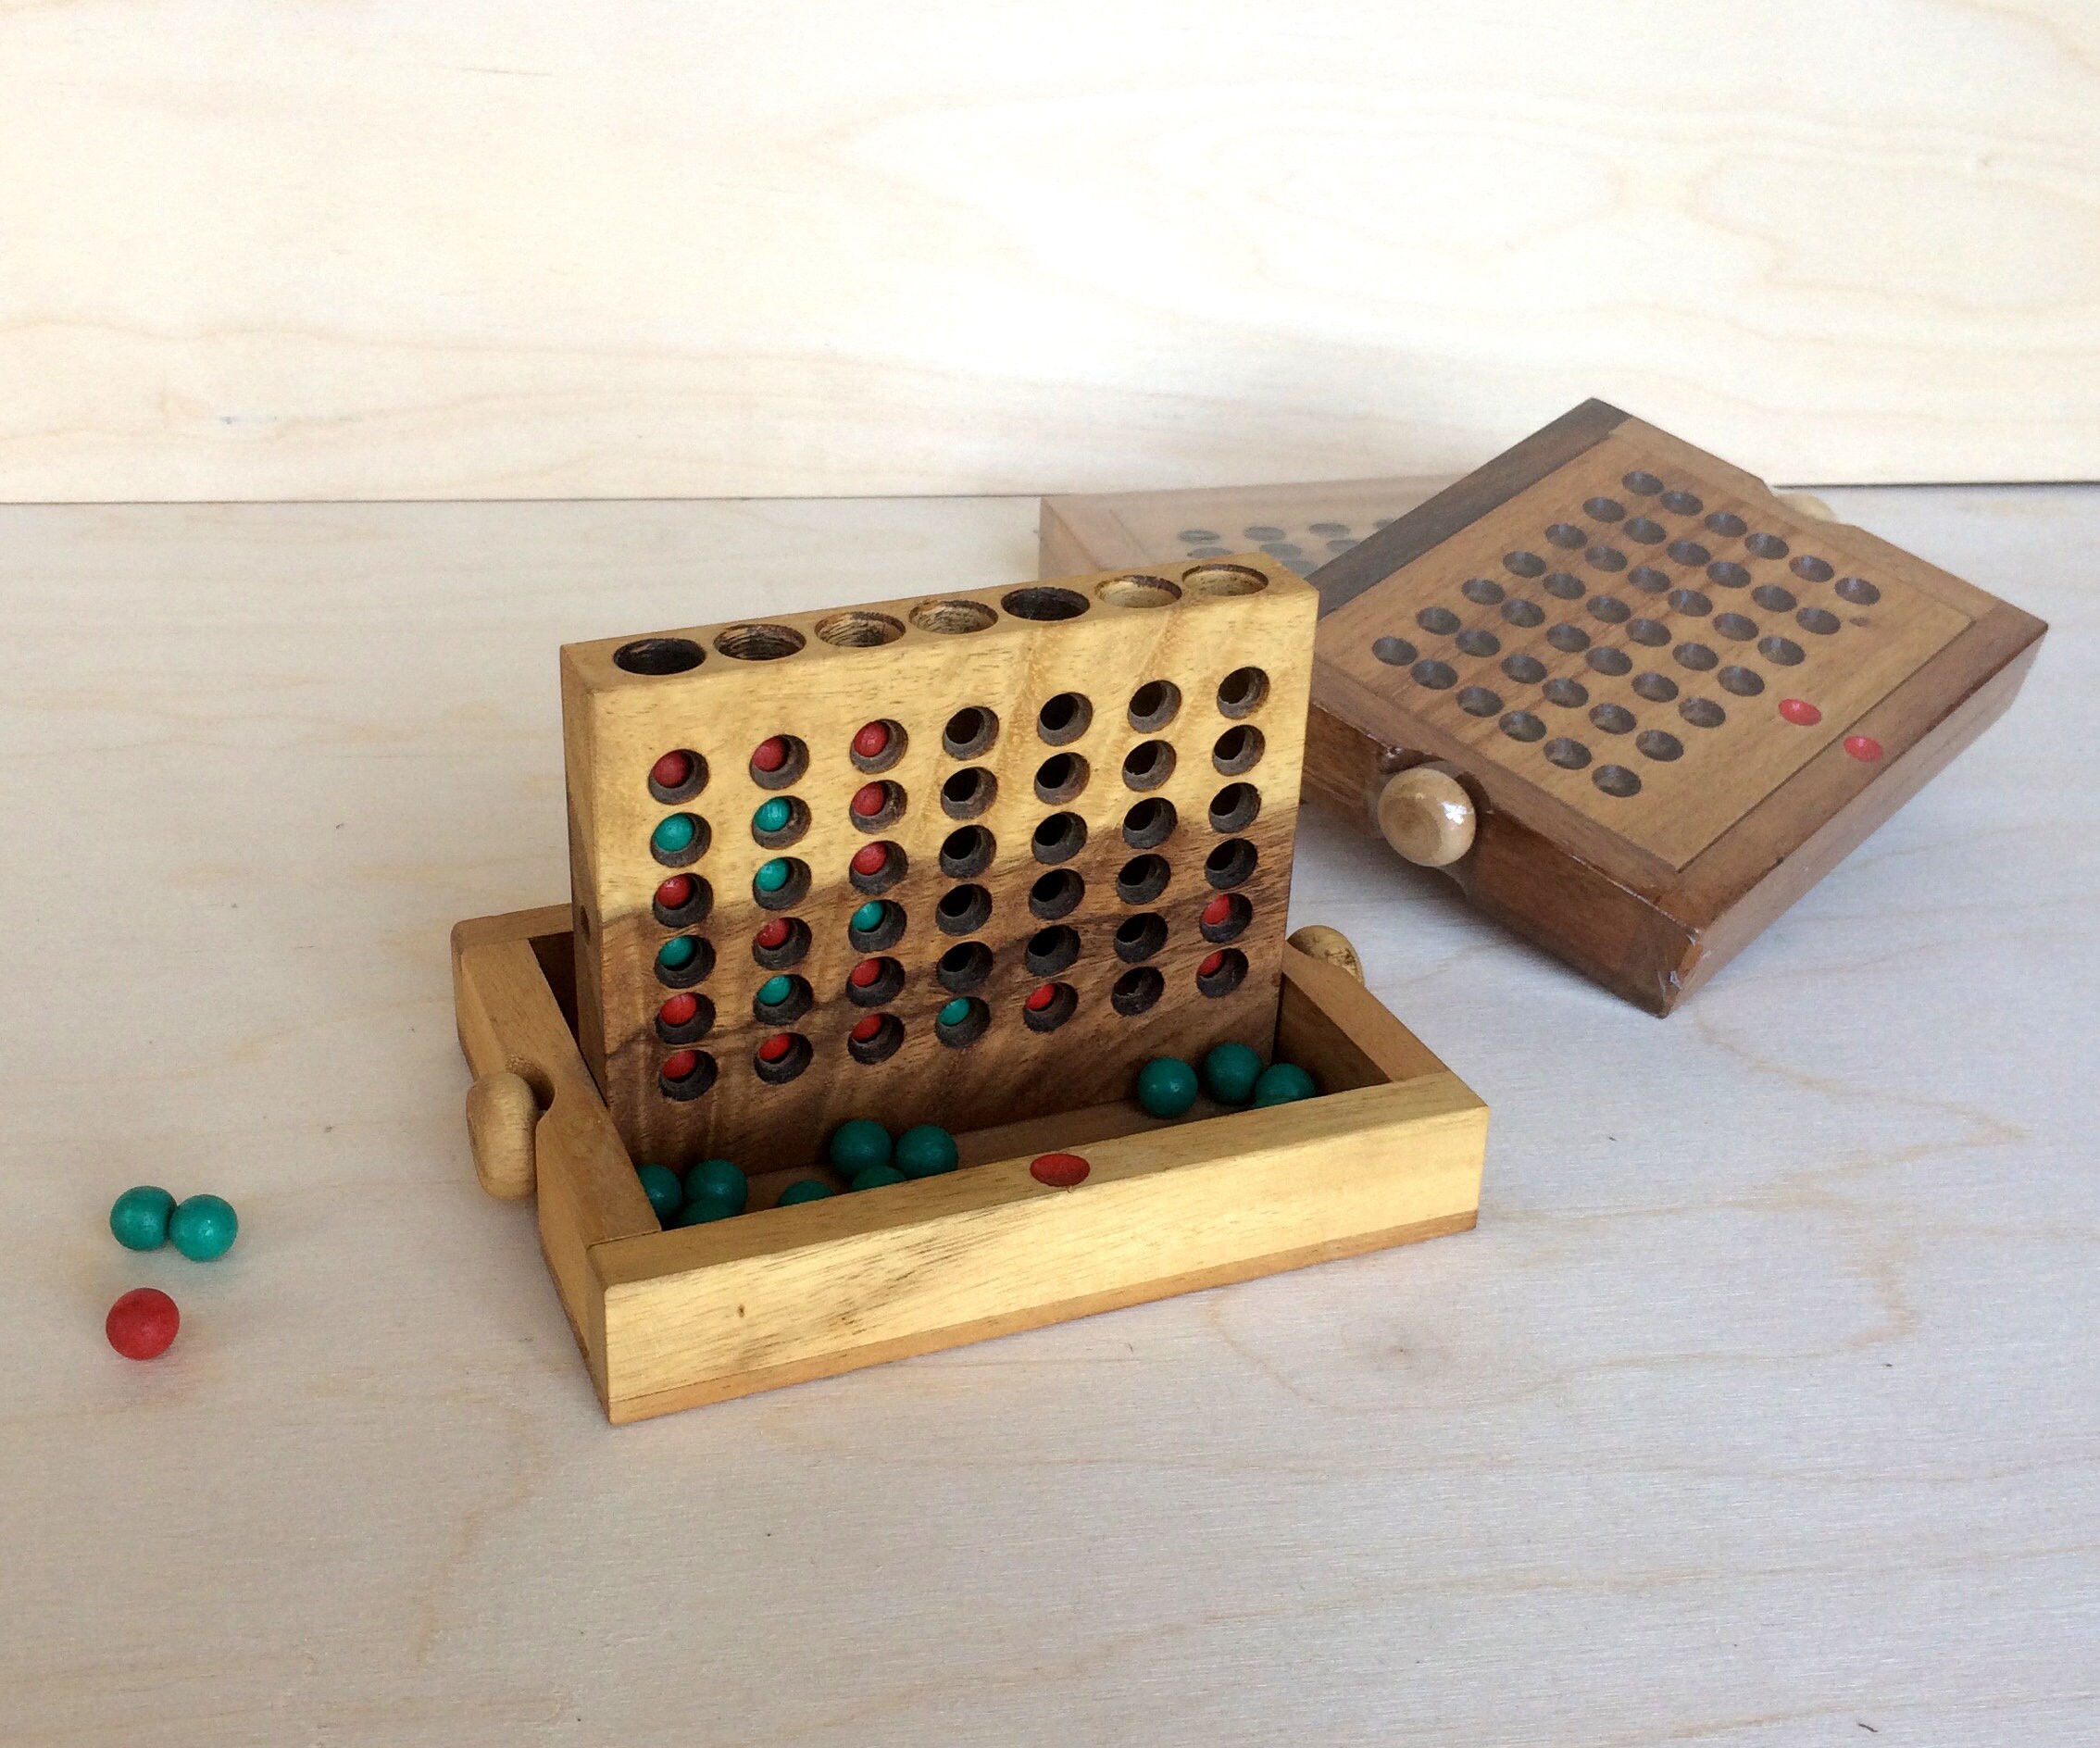  GrowUpSmart Four in A Row Game - Made from Wood : Toys & Games